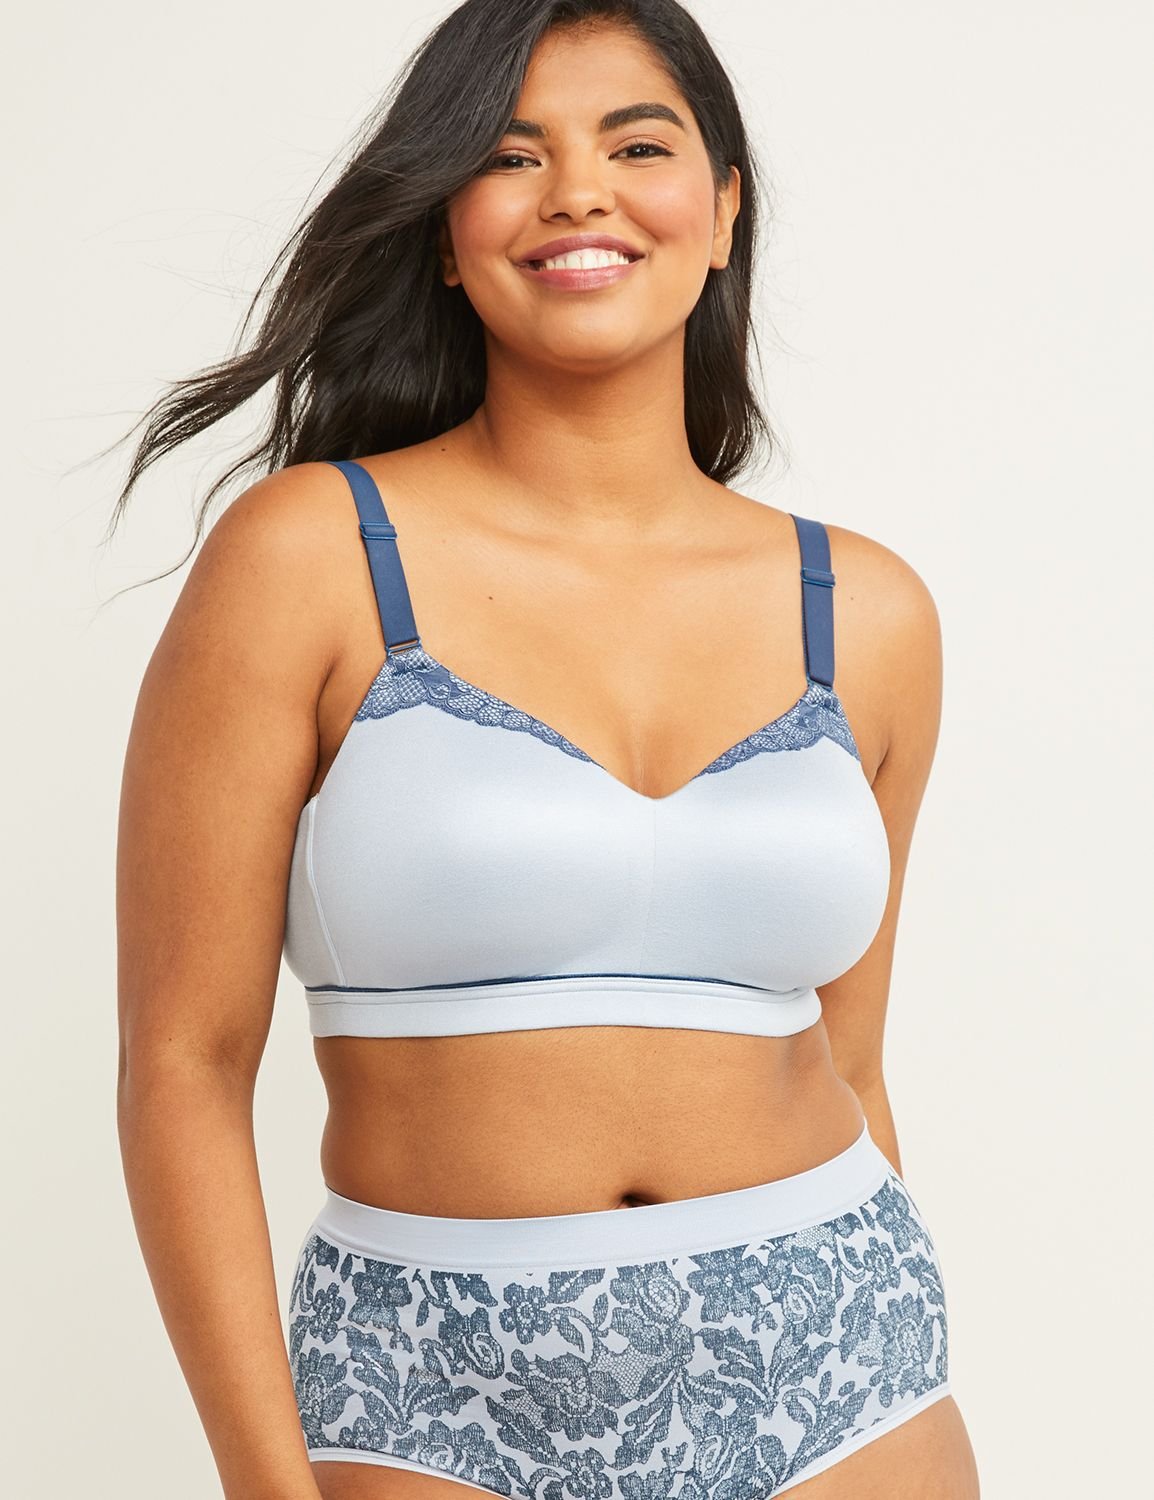 Lane Bryant: Your search is over.